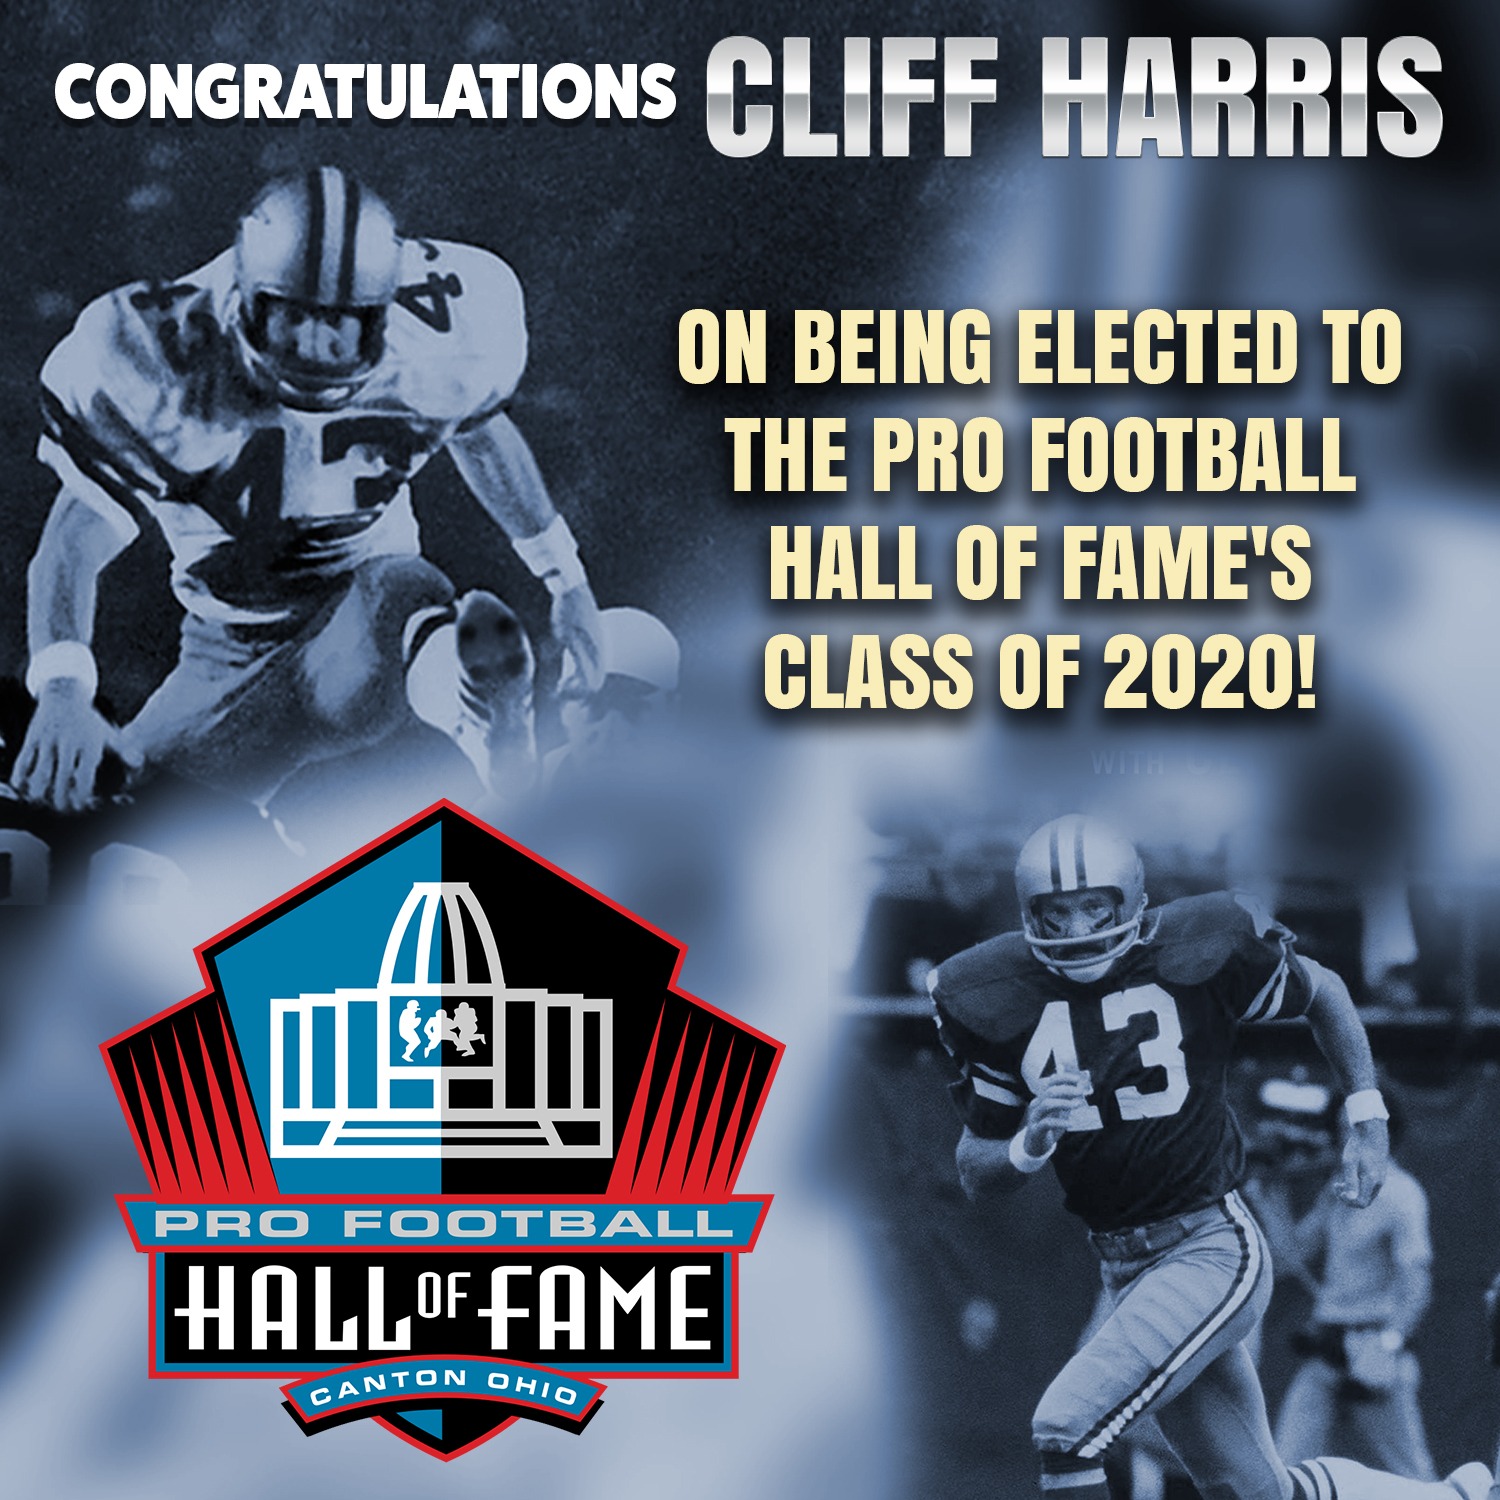 The Cliff Harris Award | Small College Defensive Player Of The Year